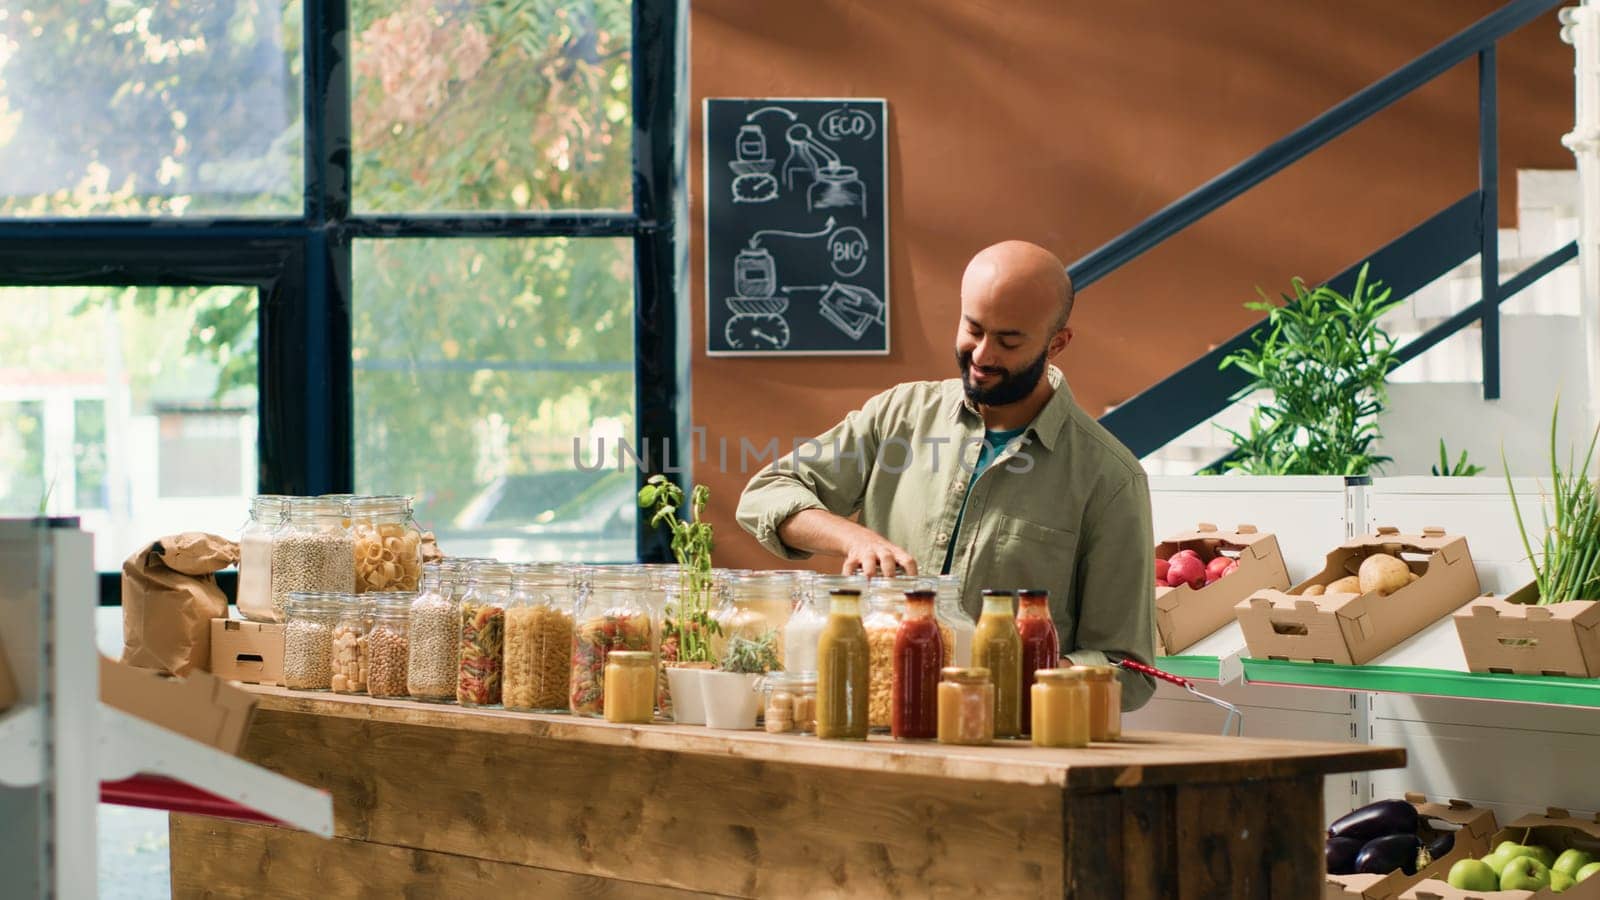 Middle eastern man in ecological food store examining organic homegrown fruits and vegetables, opening jars with sustainable pasta or spices. Customer admires fresh bio merchandise.